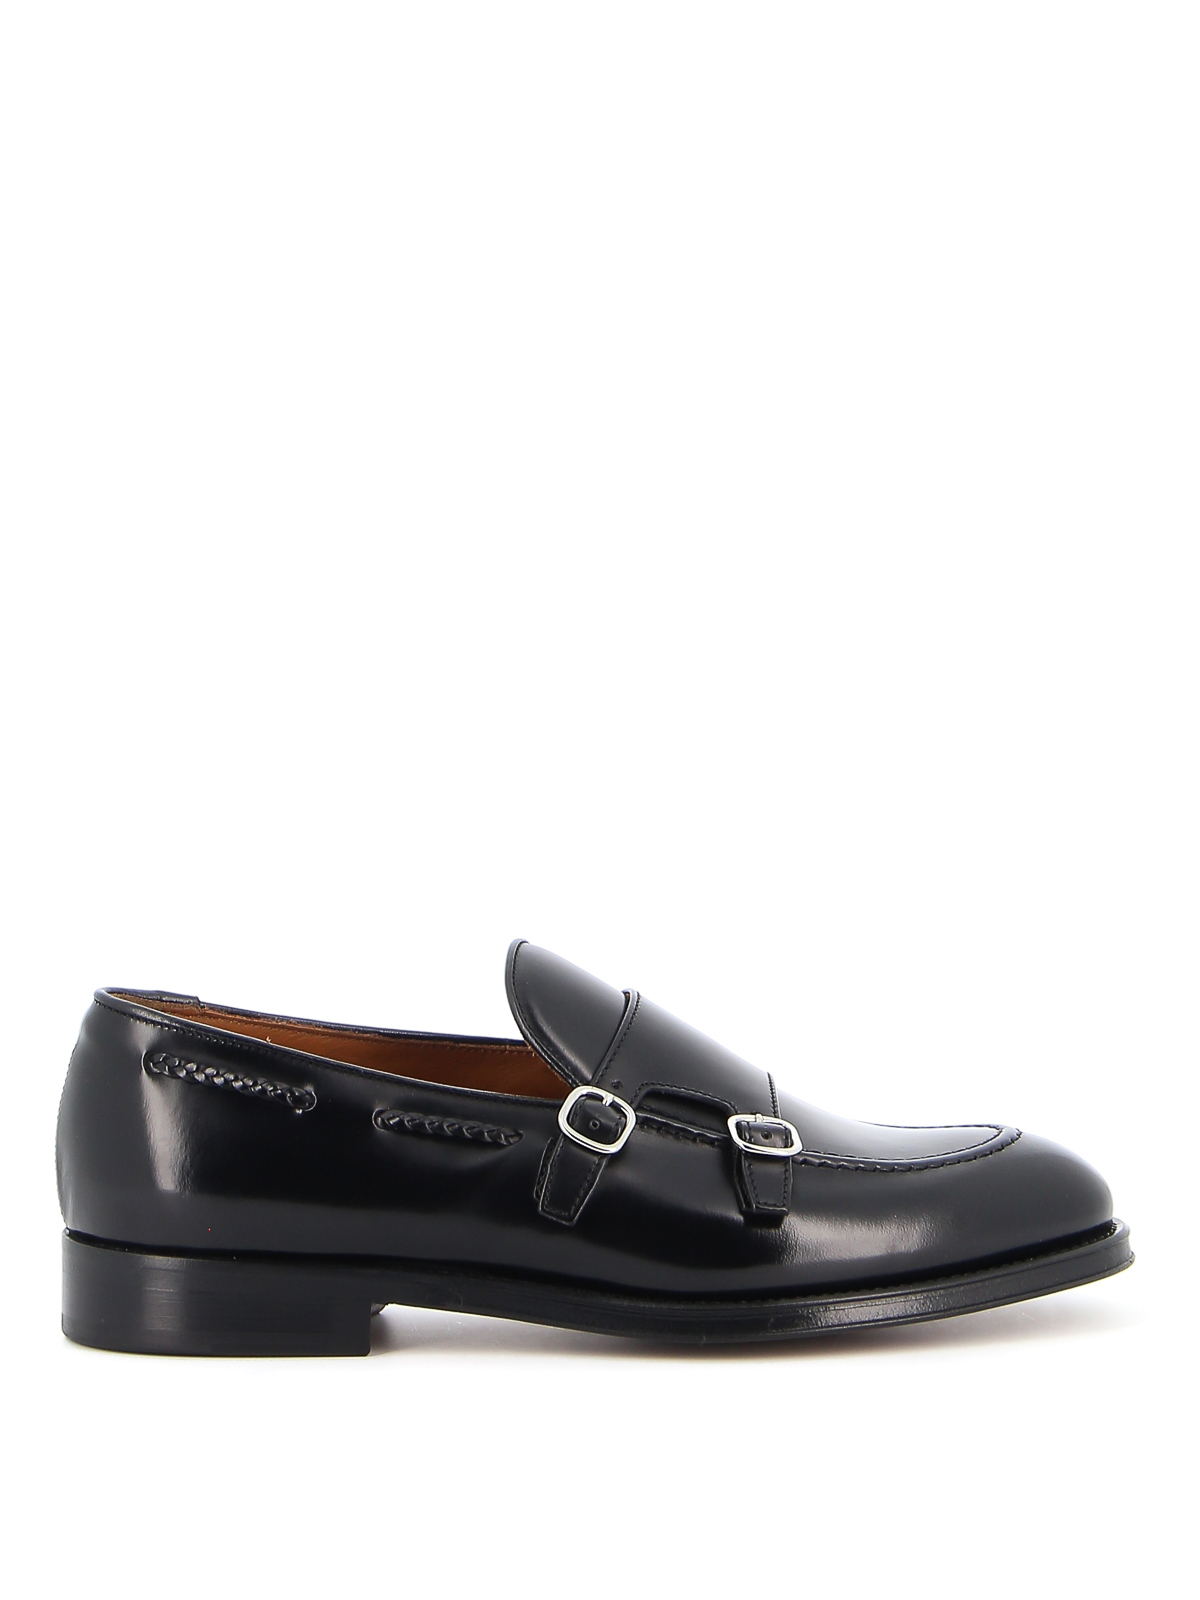 Doucal's Black Calf Leather Monk Shoes